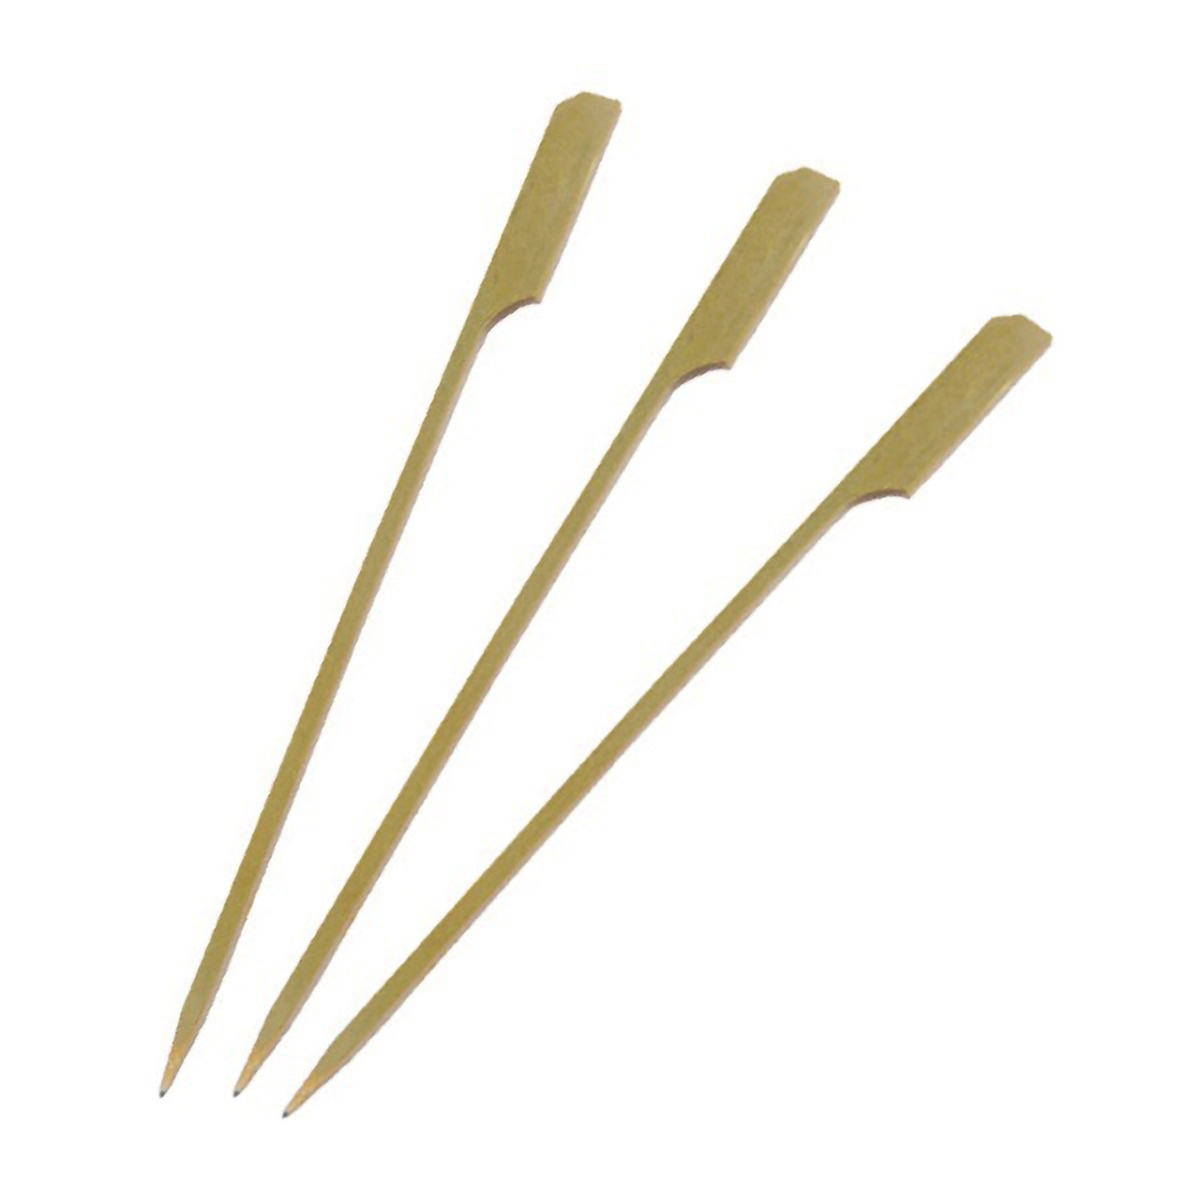 Picture of Packnwood 8NPBBTG250 9.84 in. Teppo Gushi Bamboo Skewer - 2000 Piece